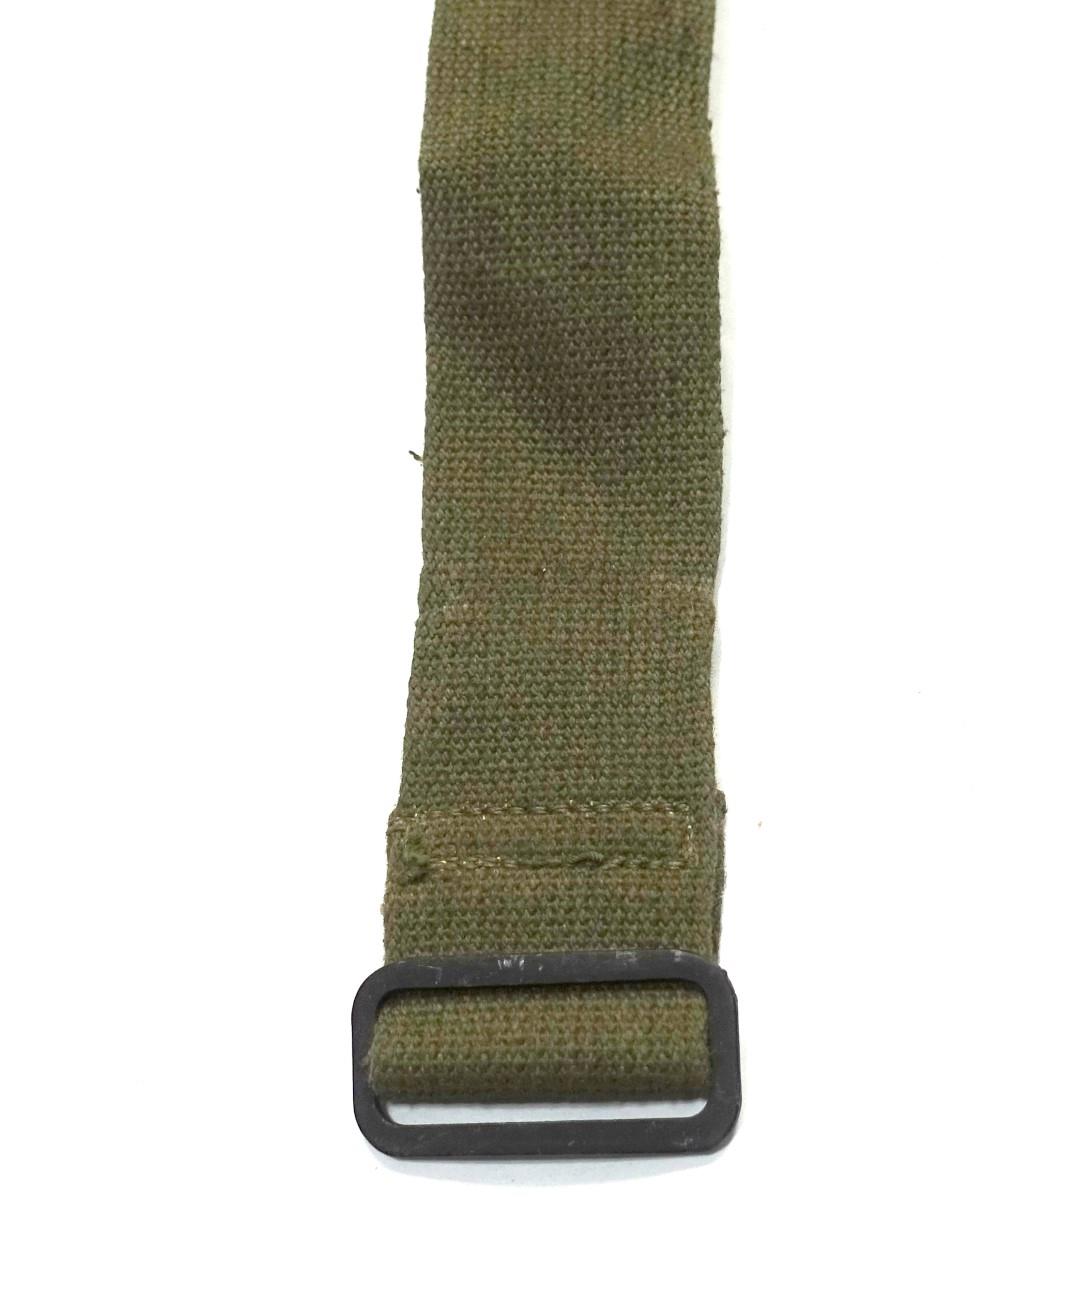 ALL-5215 | ALL-5215 Military Hold Down Strap 40 Inch x 1 12 Inches NOS (4) (Large).JPG